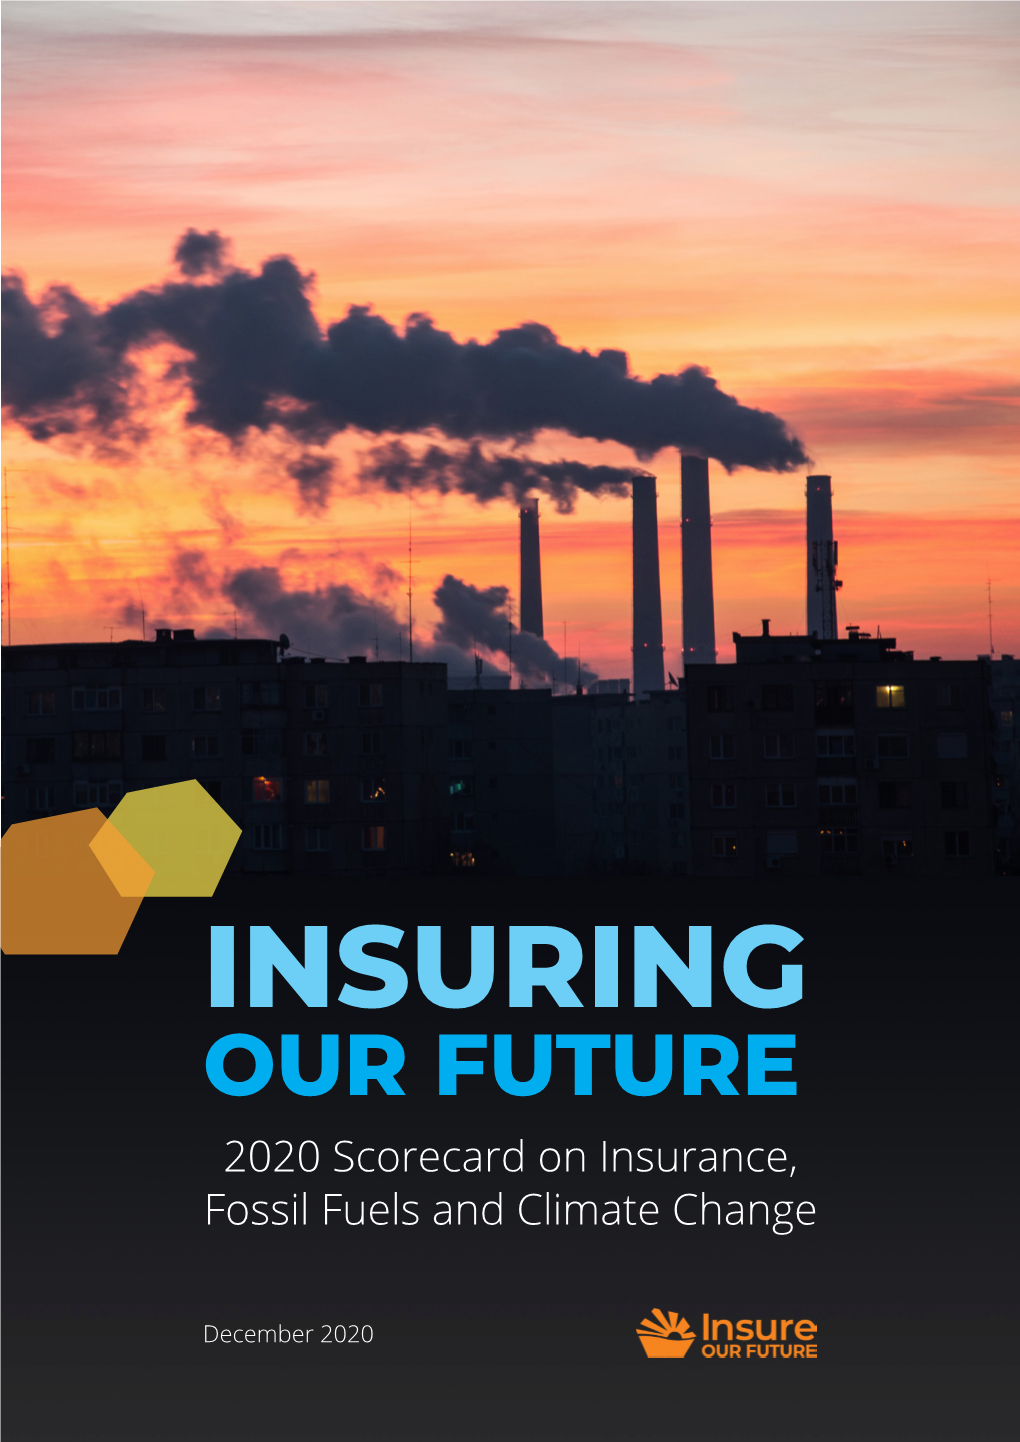 The 2020 Scorecard on Insurance, Fossil Fuels and Climate Change